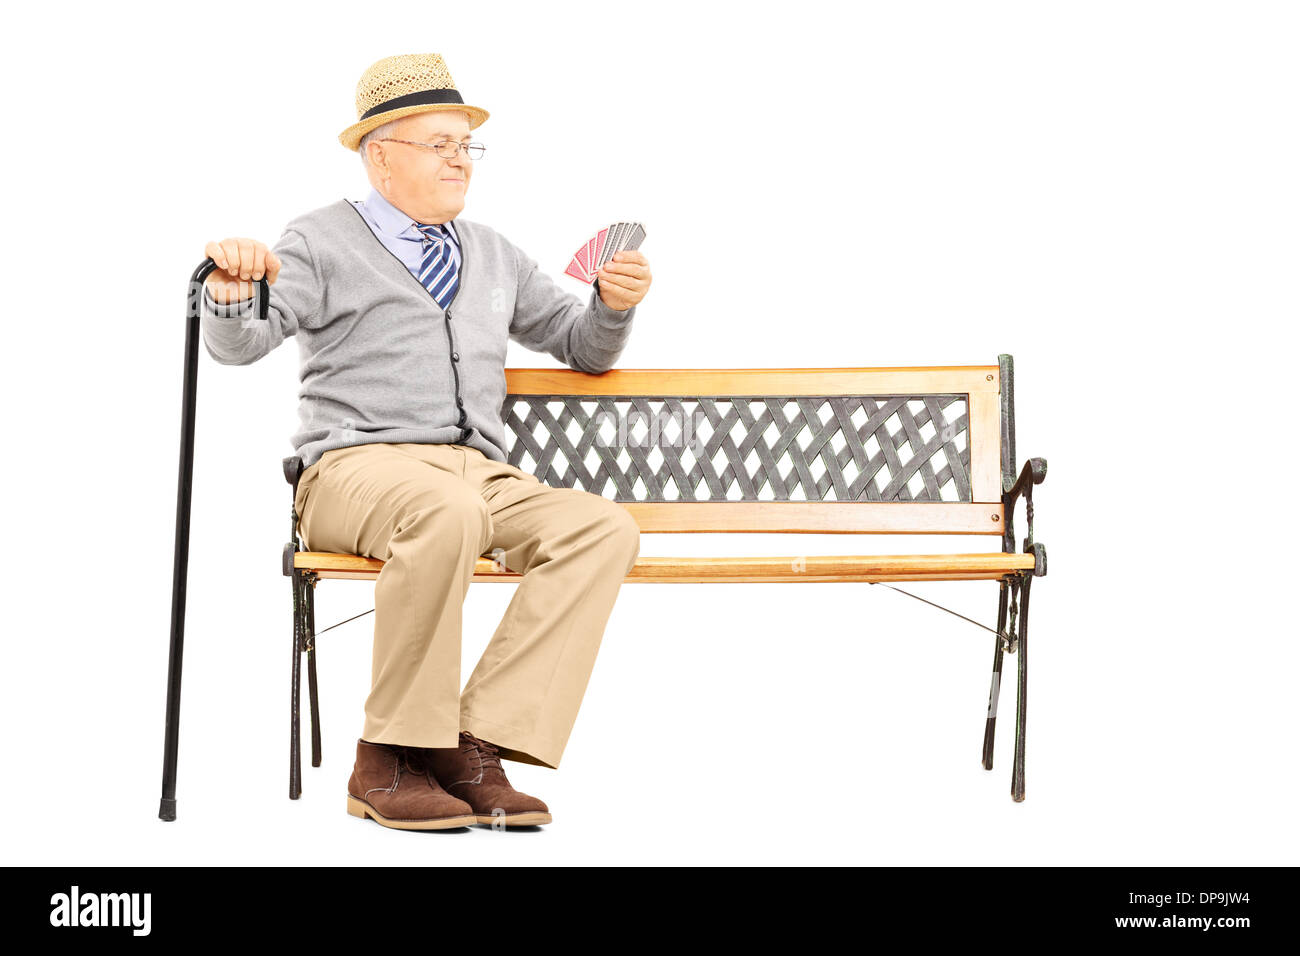 Senile old man with cane, sitting on bench imagining playing cards with someone else Stock Photo